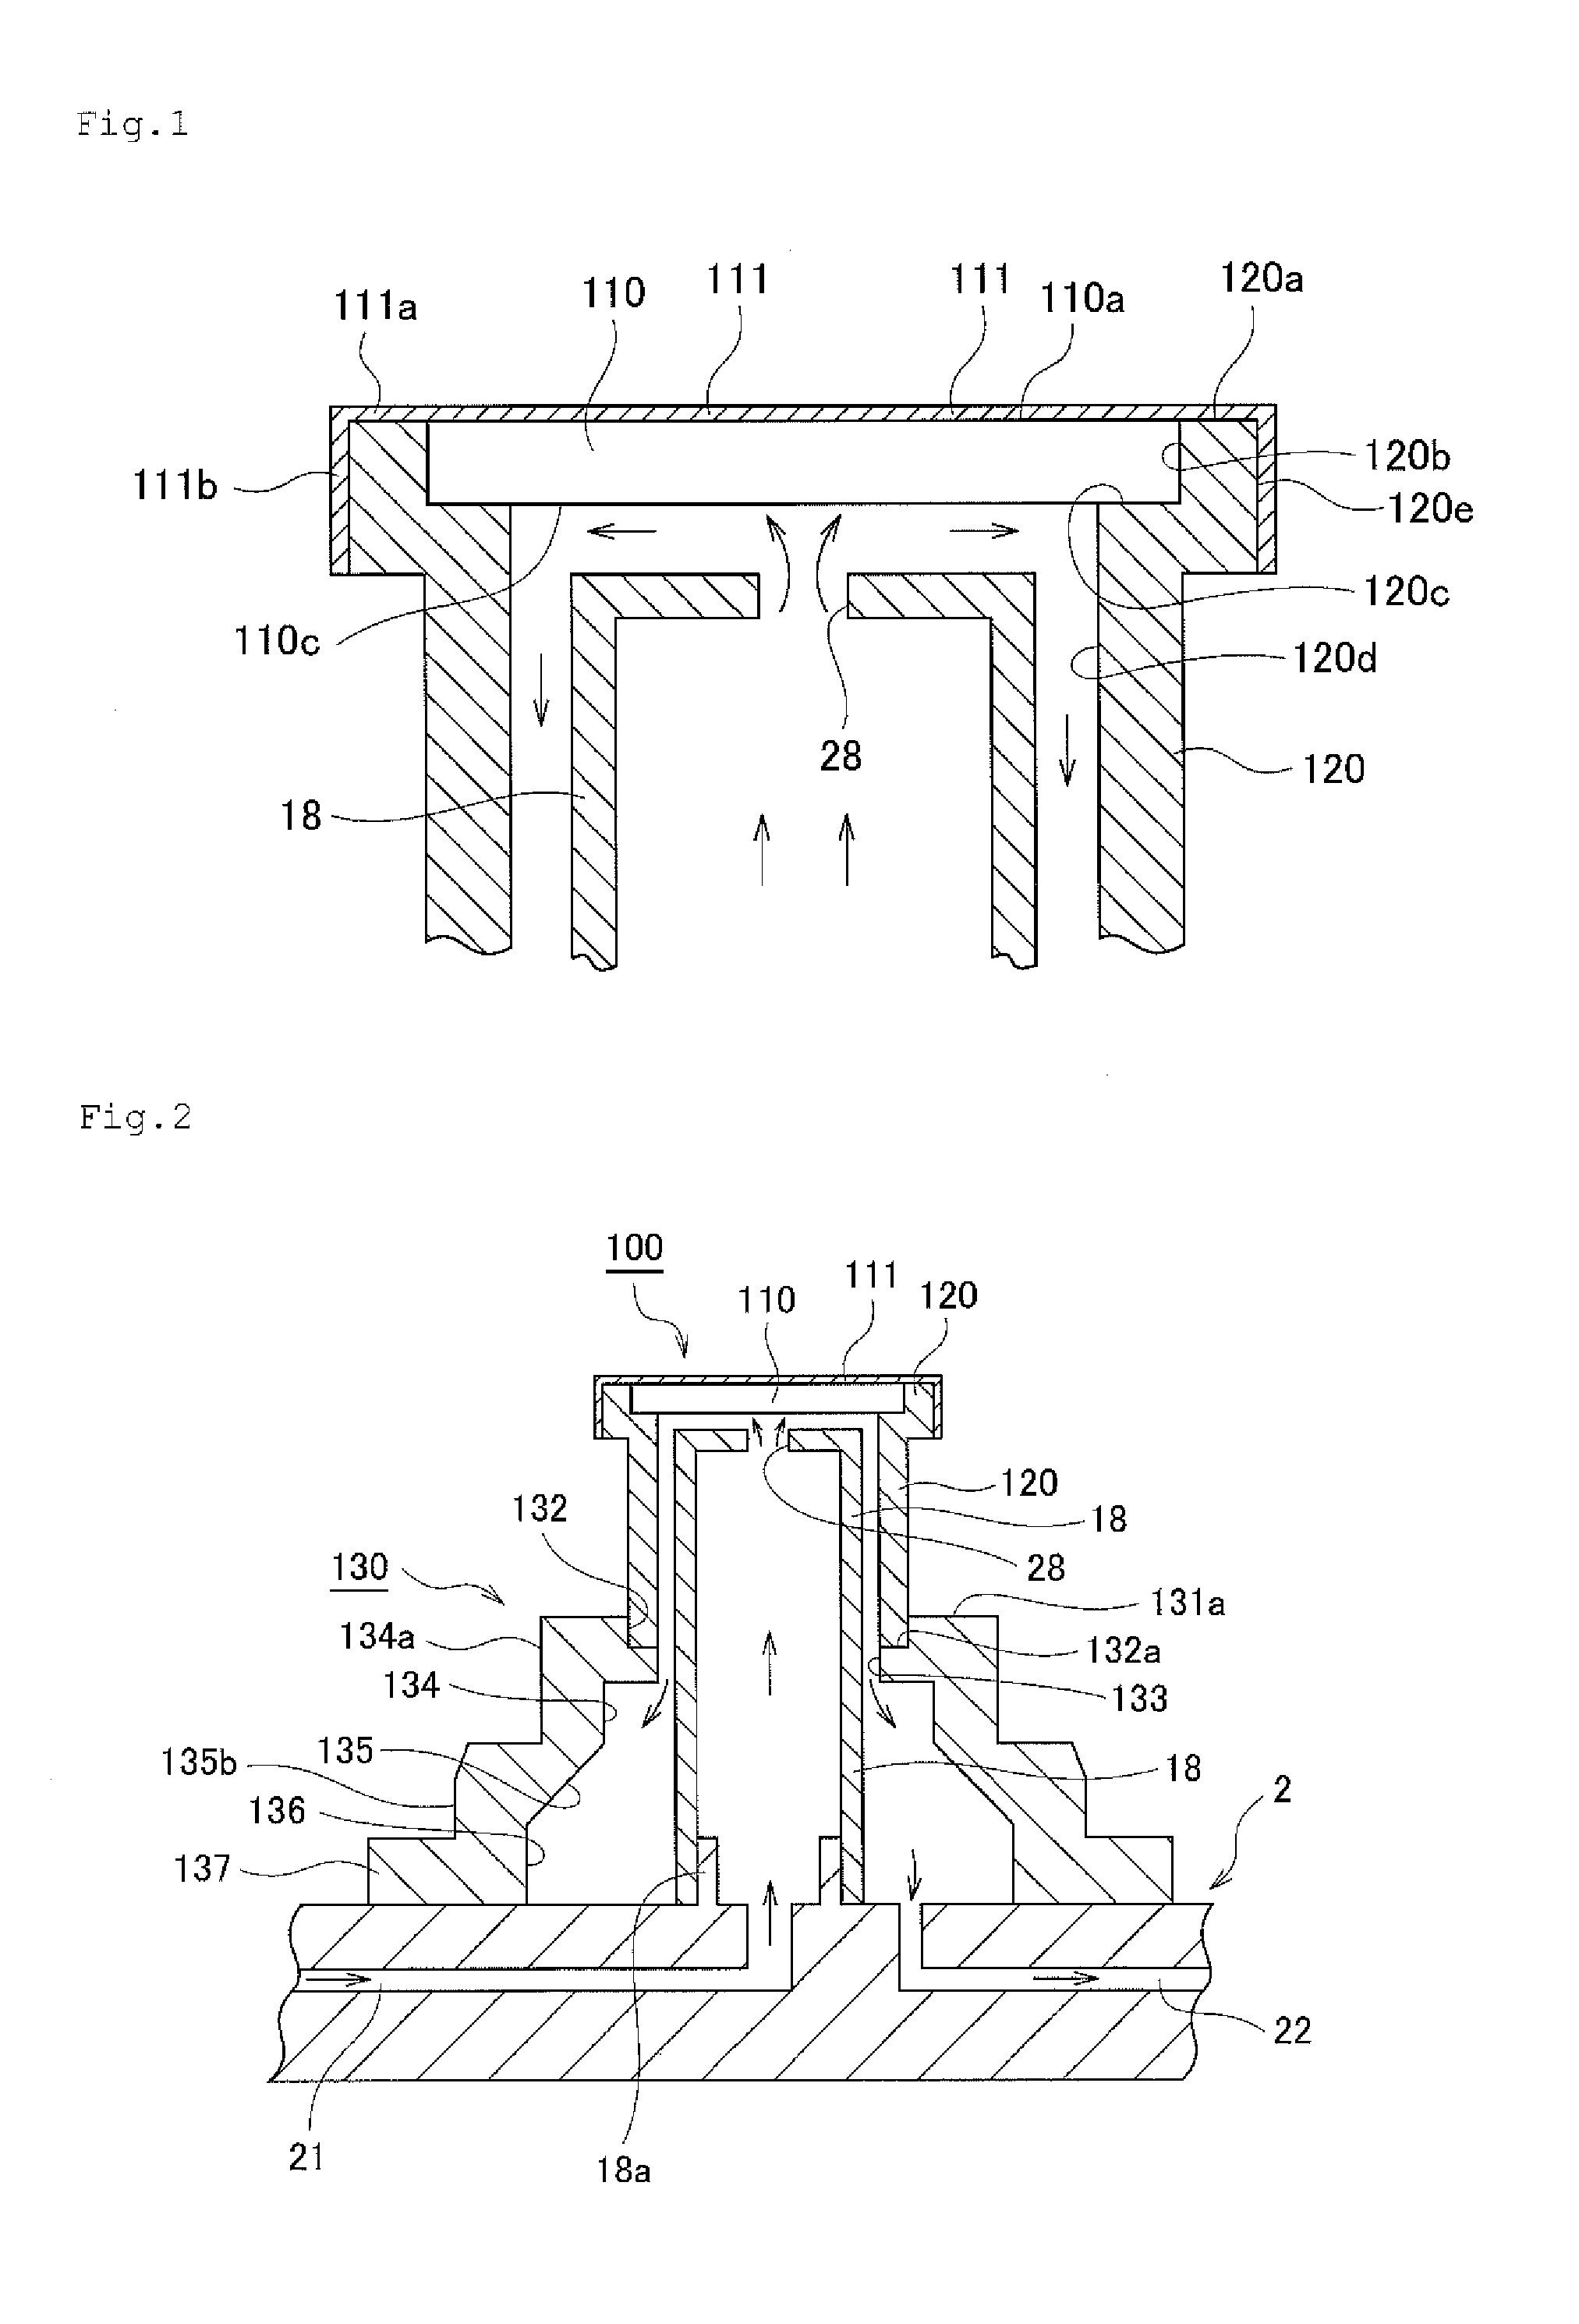 Target for x-ray generator, method of manufacturing the same and x-ray generator